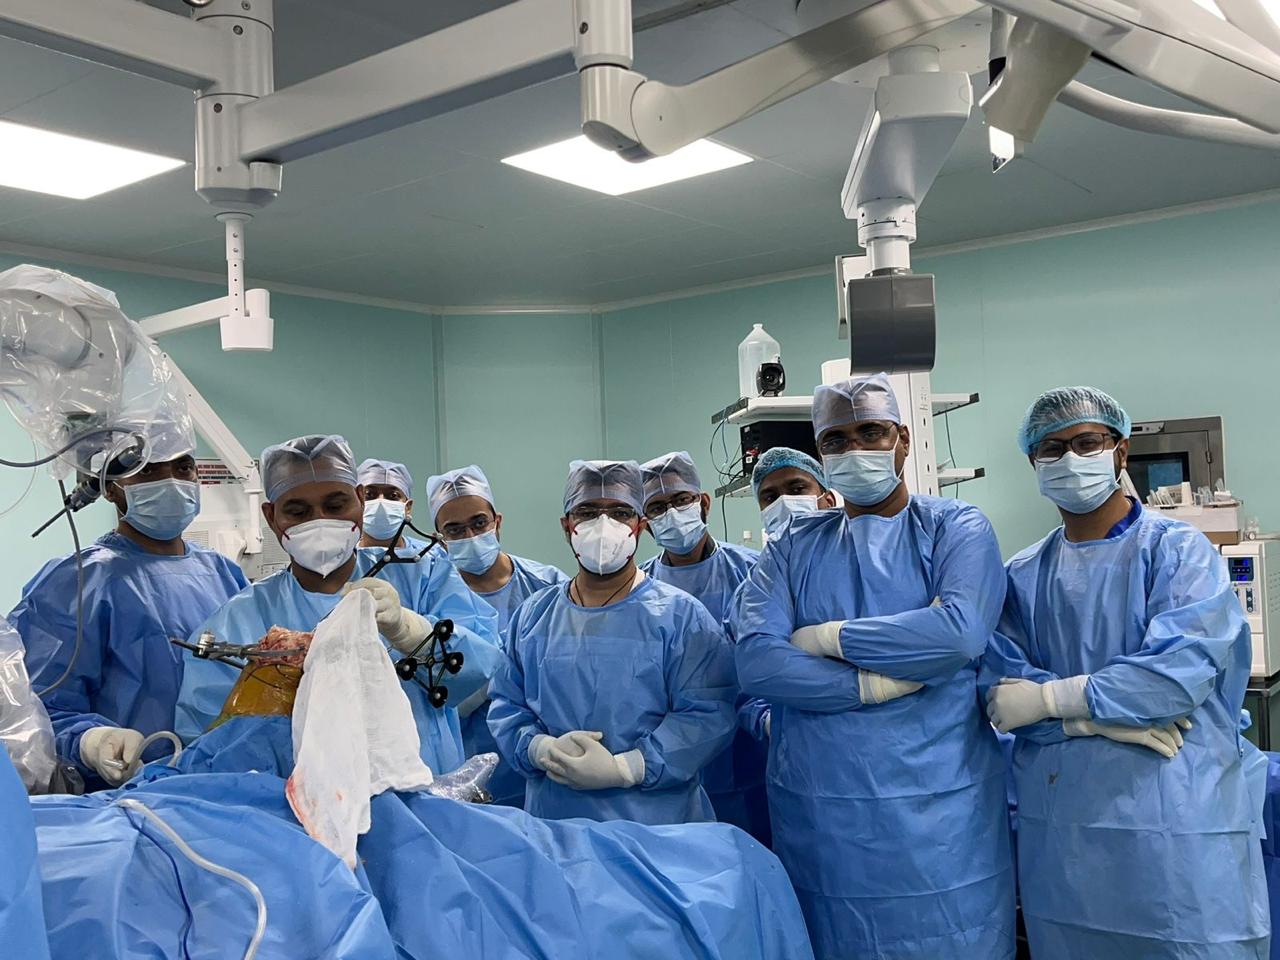 Doctors of Sports Injury Center who carried out robotic surgeries